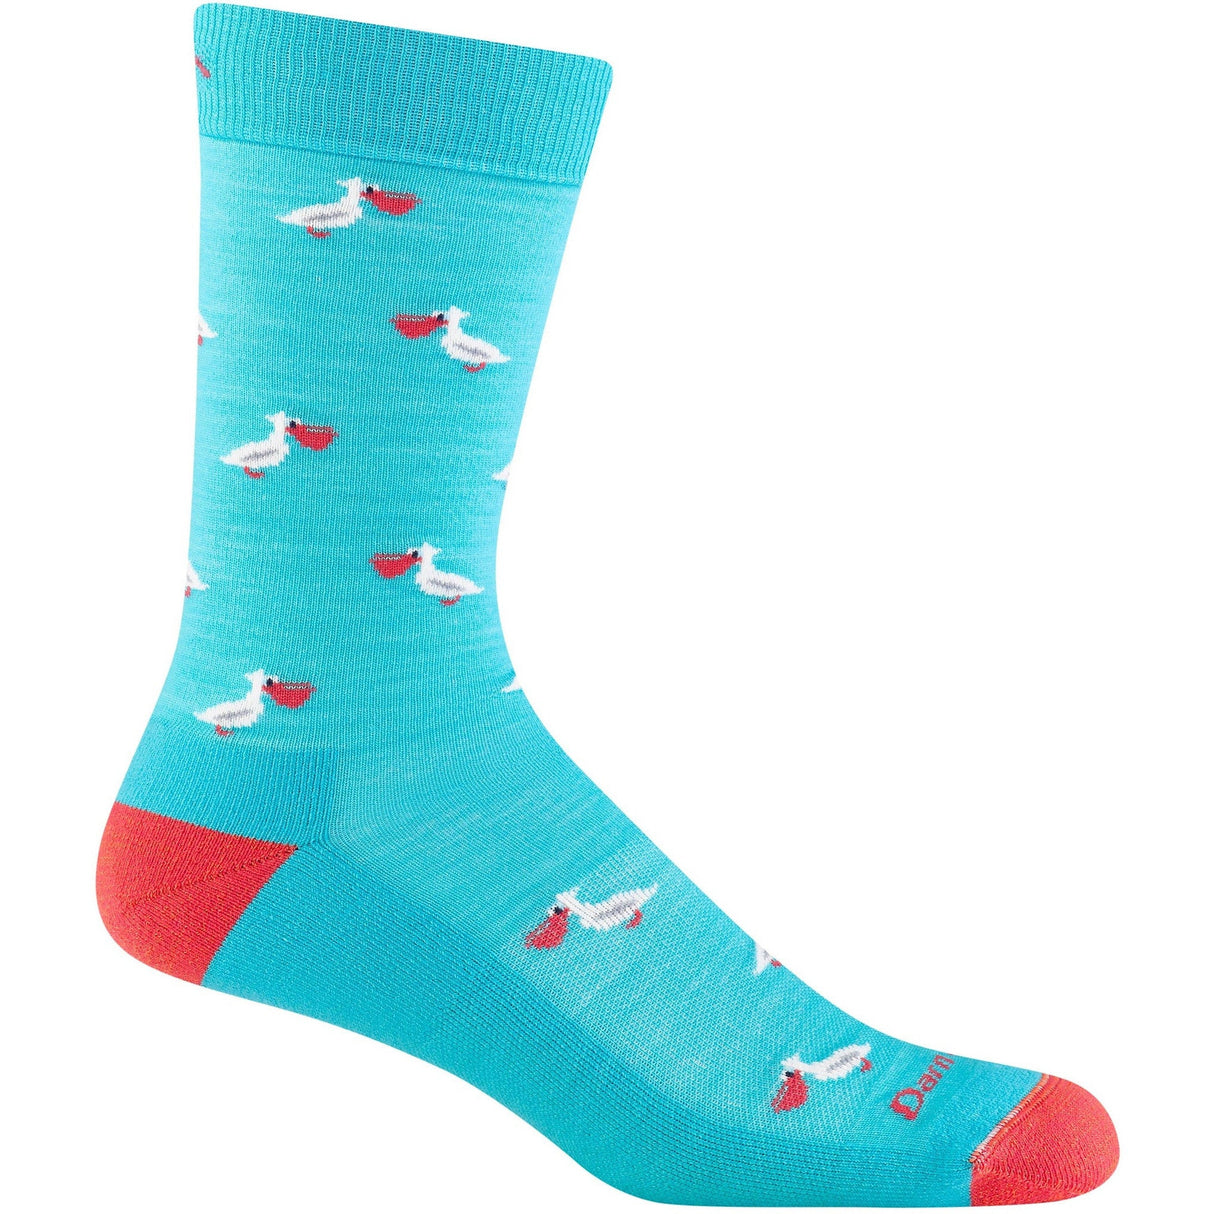 Darn Tough Mens Pelican Crew Lightweight Lifestyle Socks - Clearance  -  X-Large / Teal